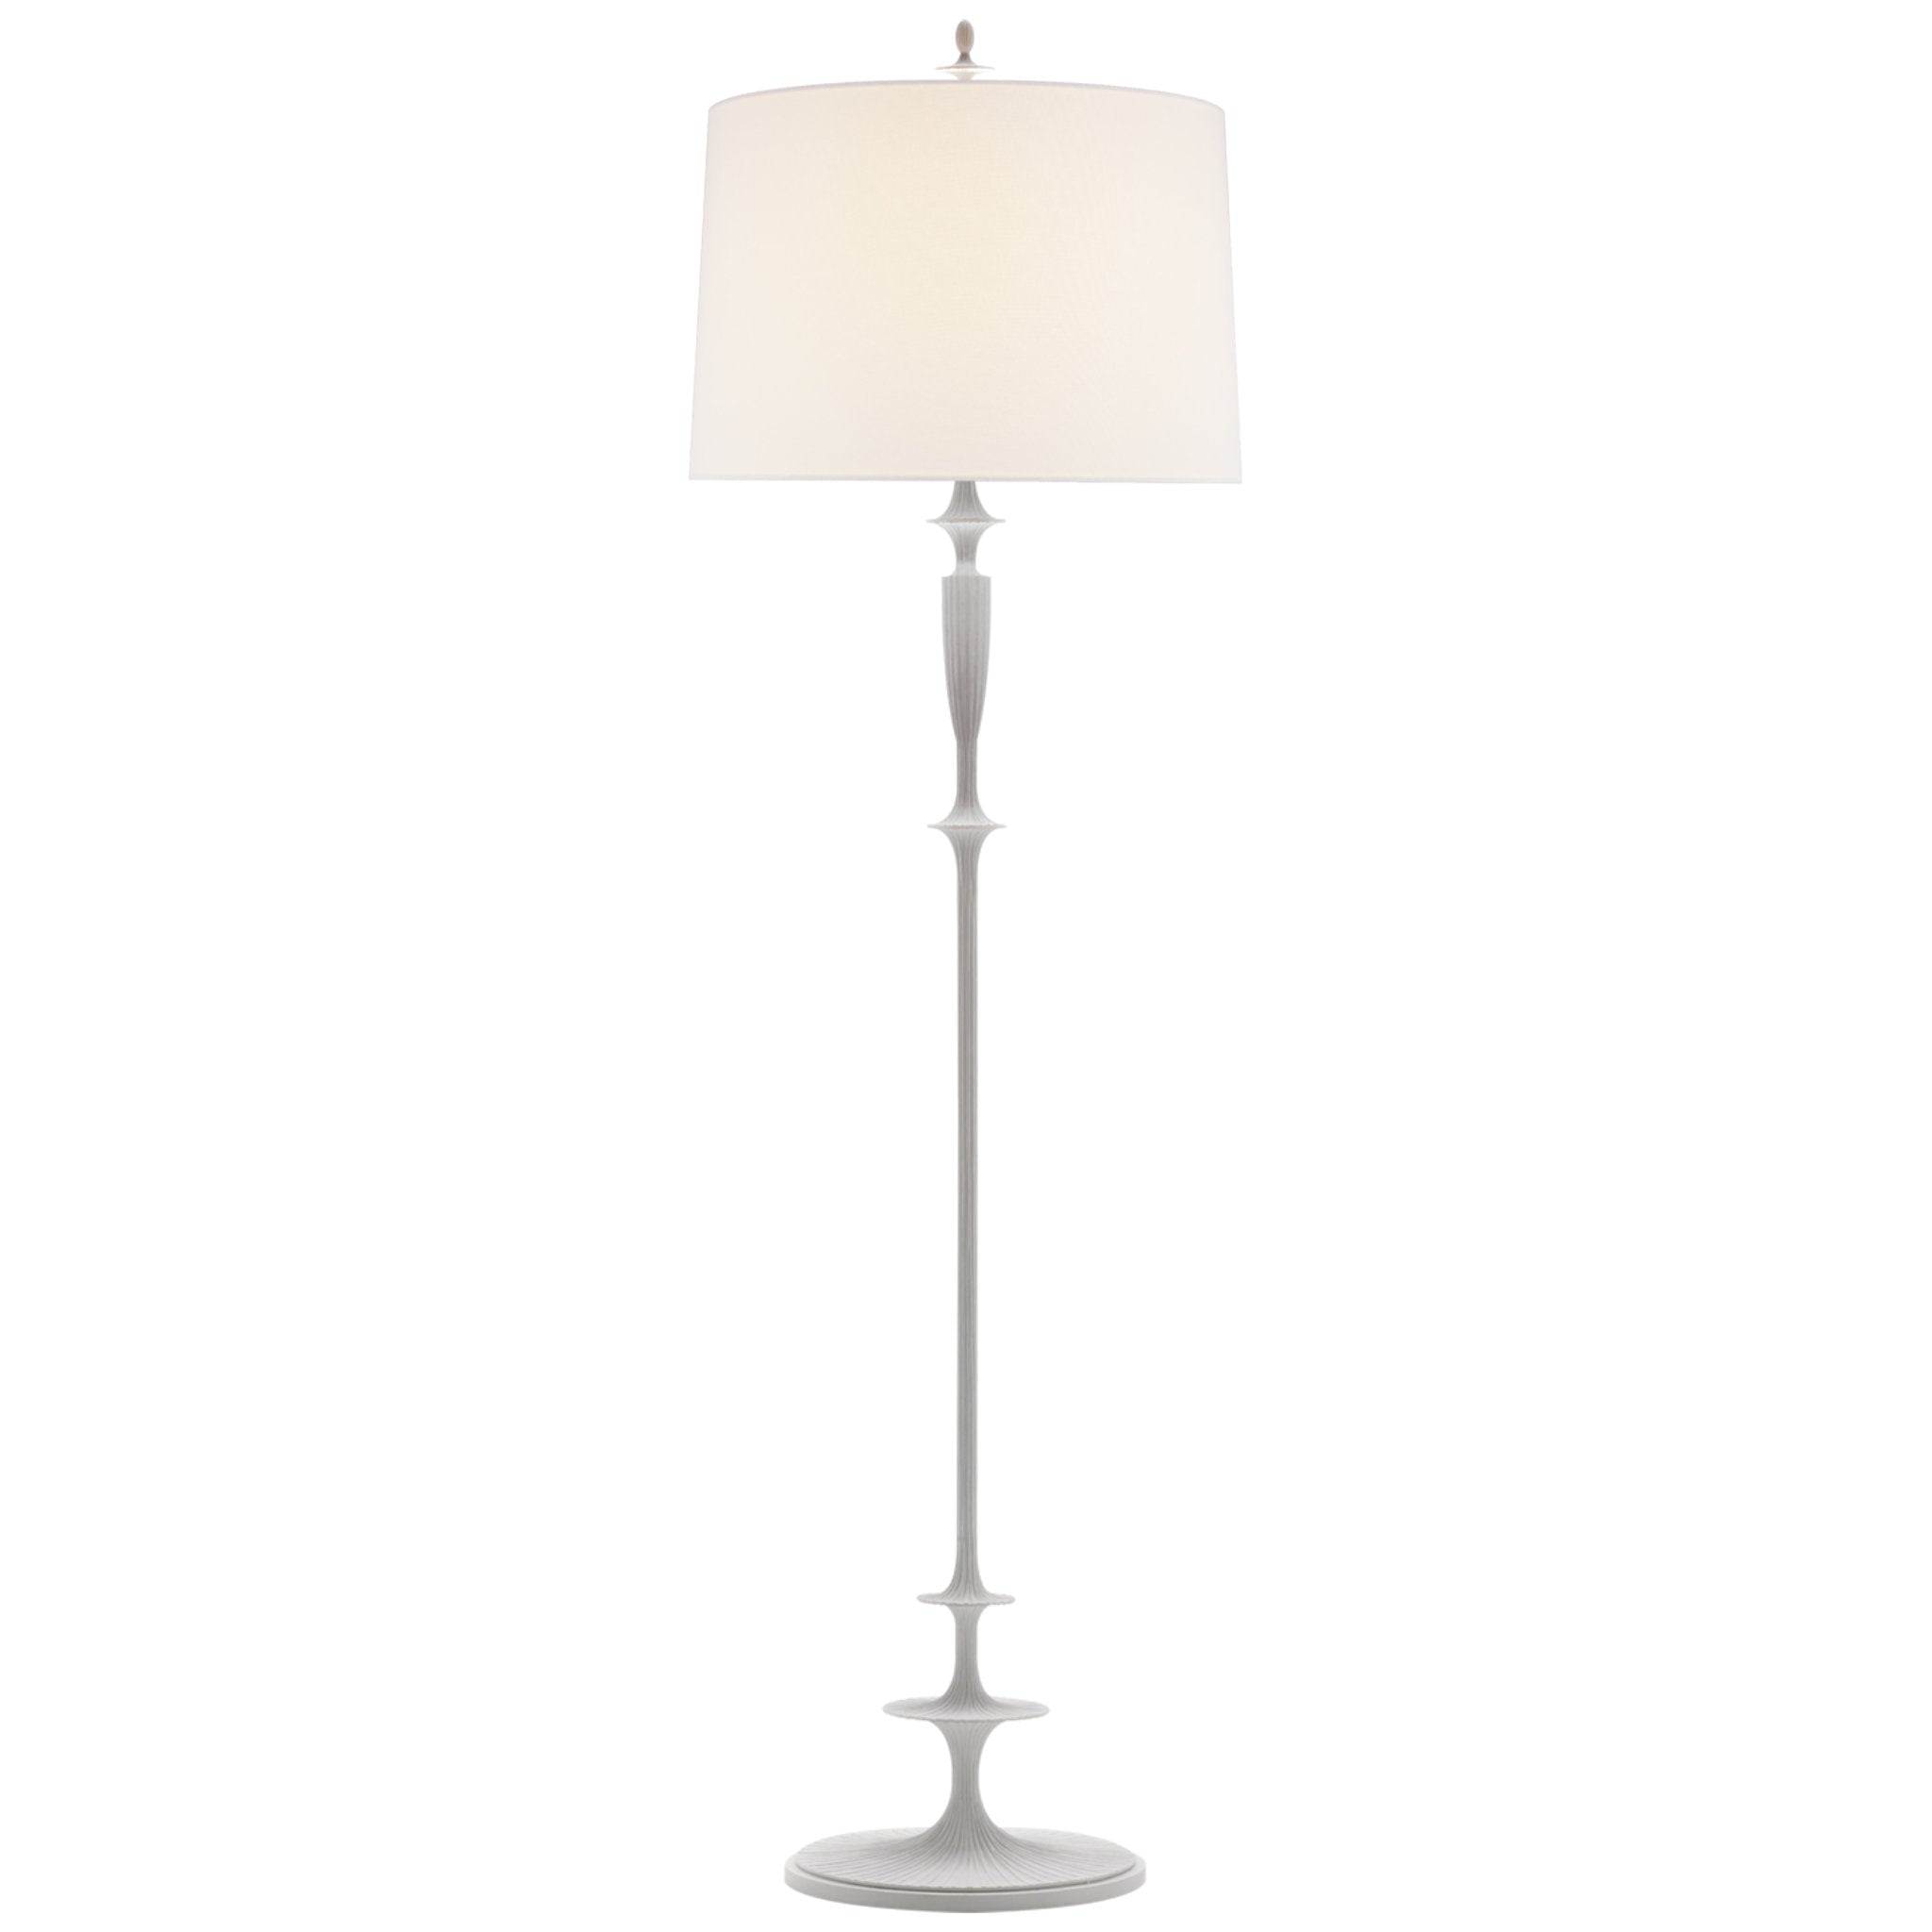 Barbara Barry Lotus Floor Lamp in Plaster White with Linen Shade